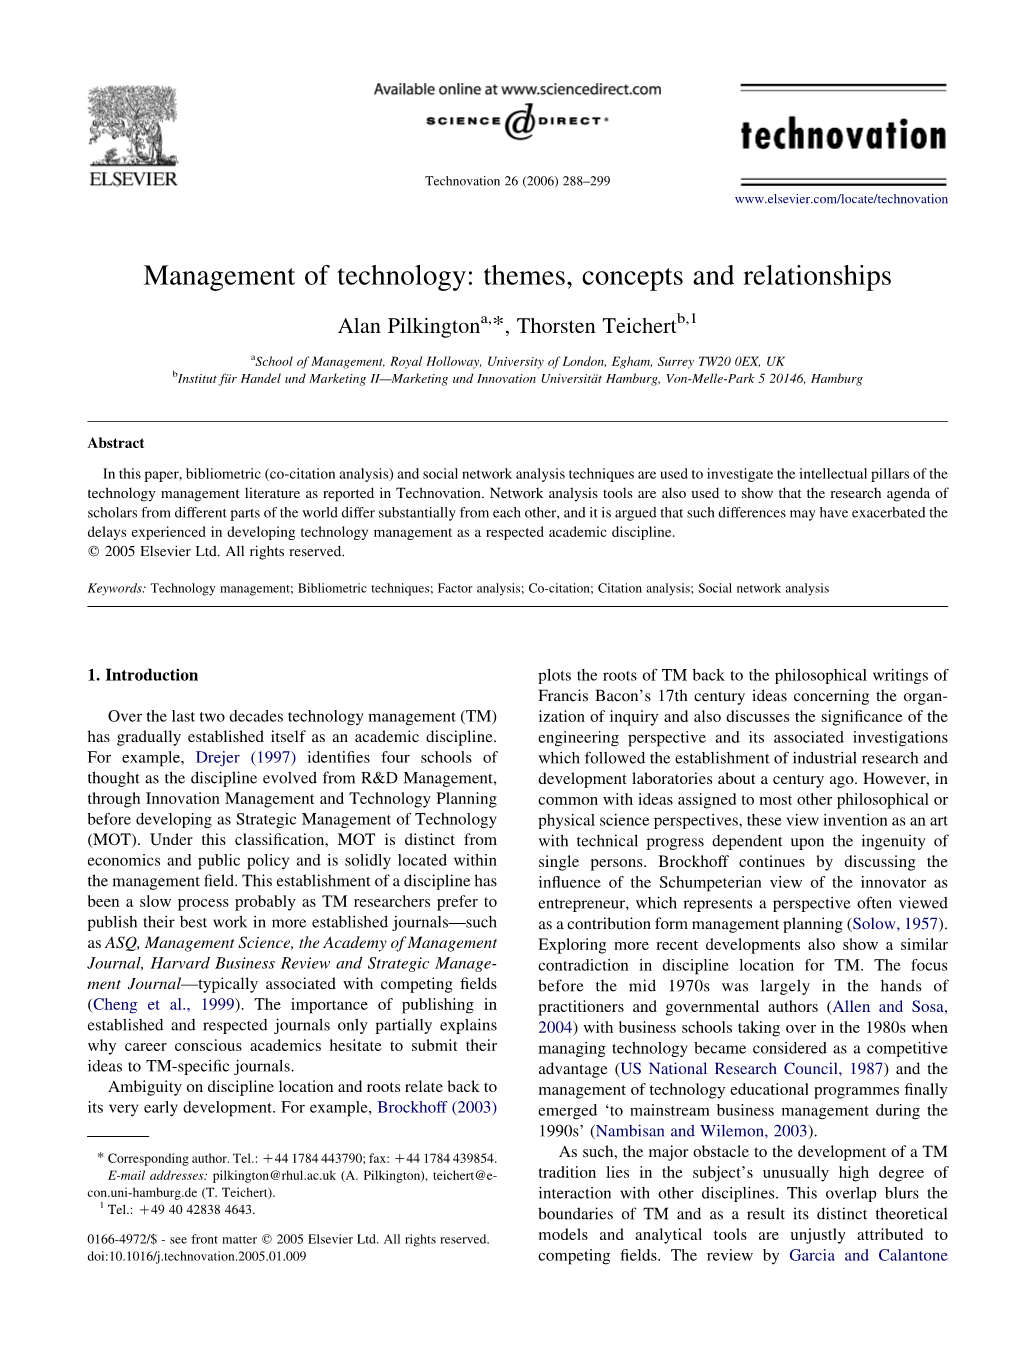 Management of Technology: Themes, Concepts and Relationships